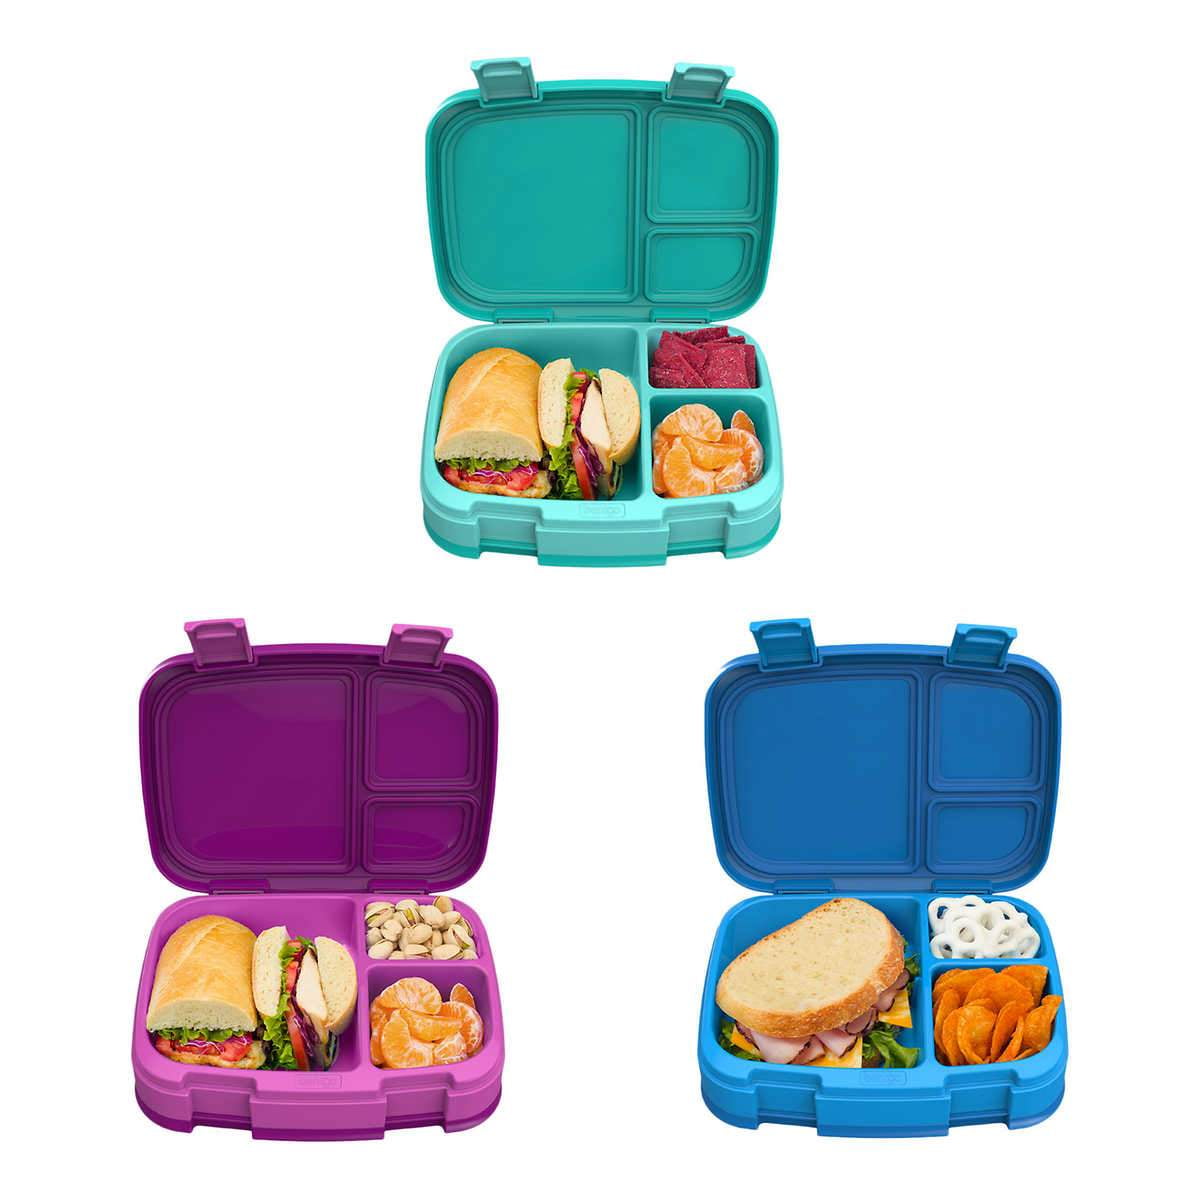  RTIC 5 Compartment Lunch Containers, Hot Food Container With  Lid For Adults Or Kids, Microwave Safe Divided Snack Lunch Box For Work,  School Or Travel, Reusable, BPA Free With Vent Space